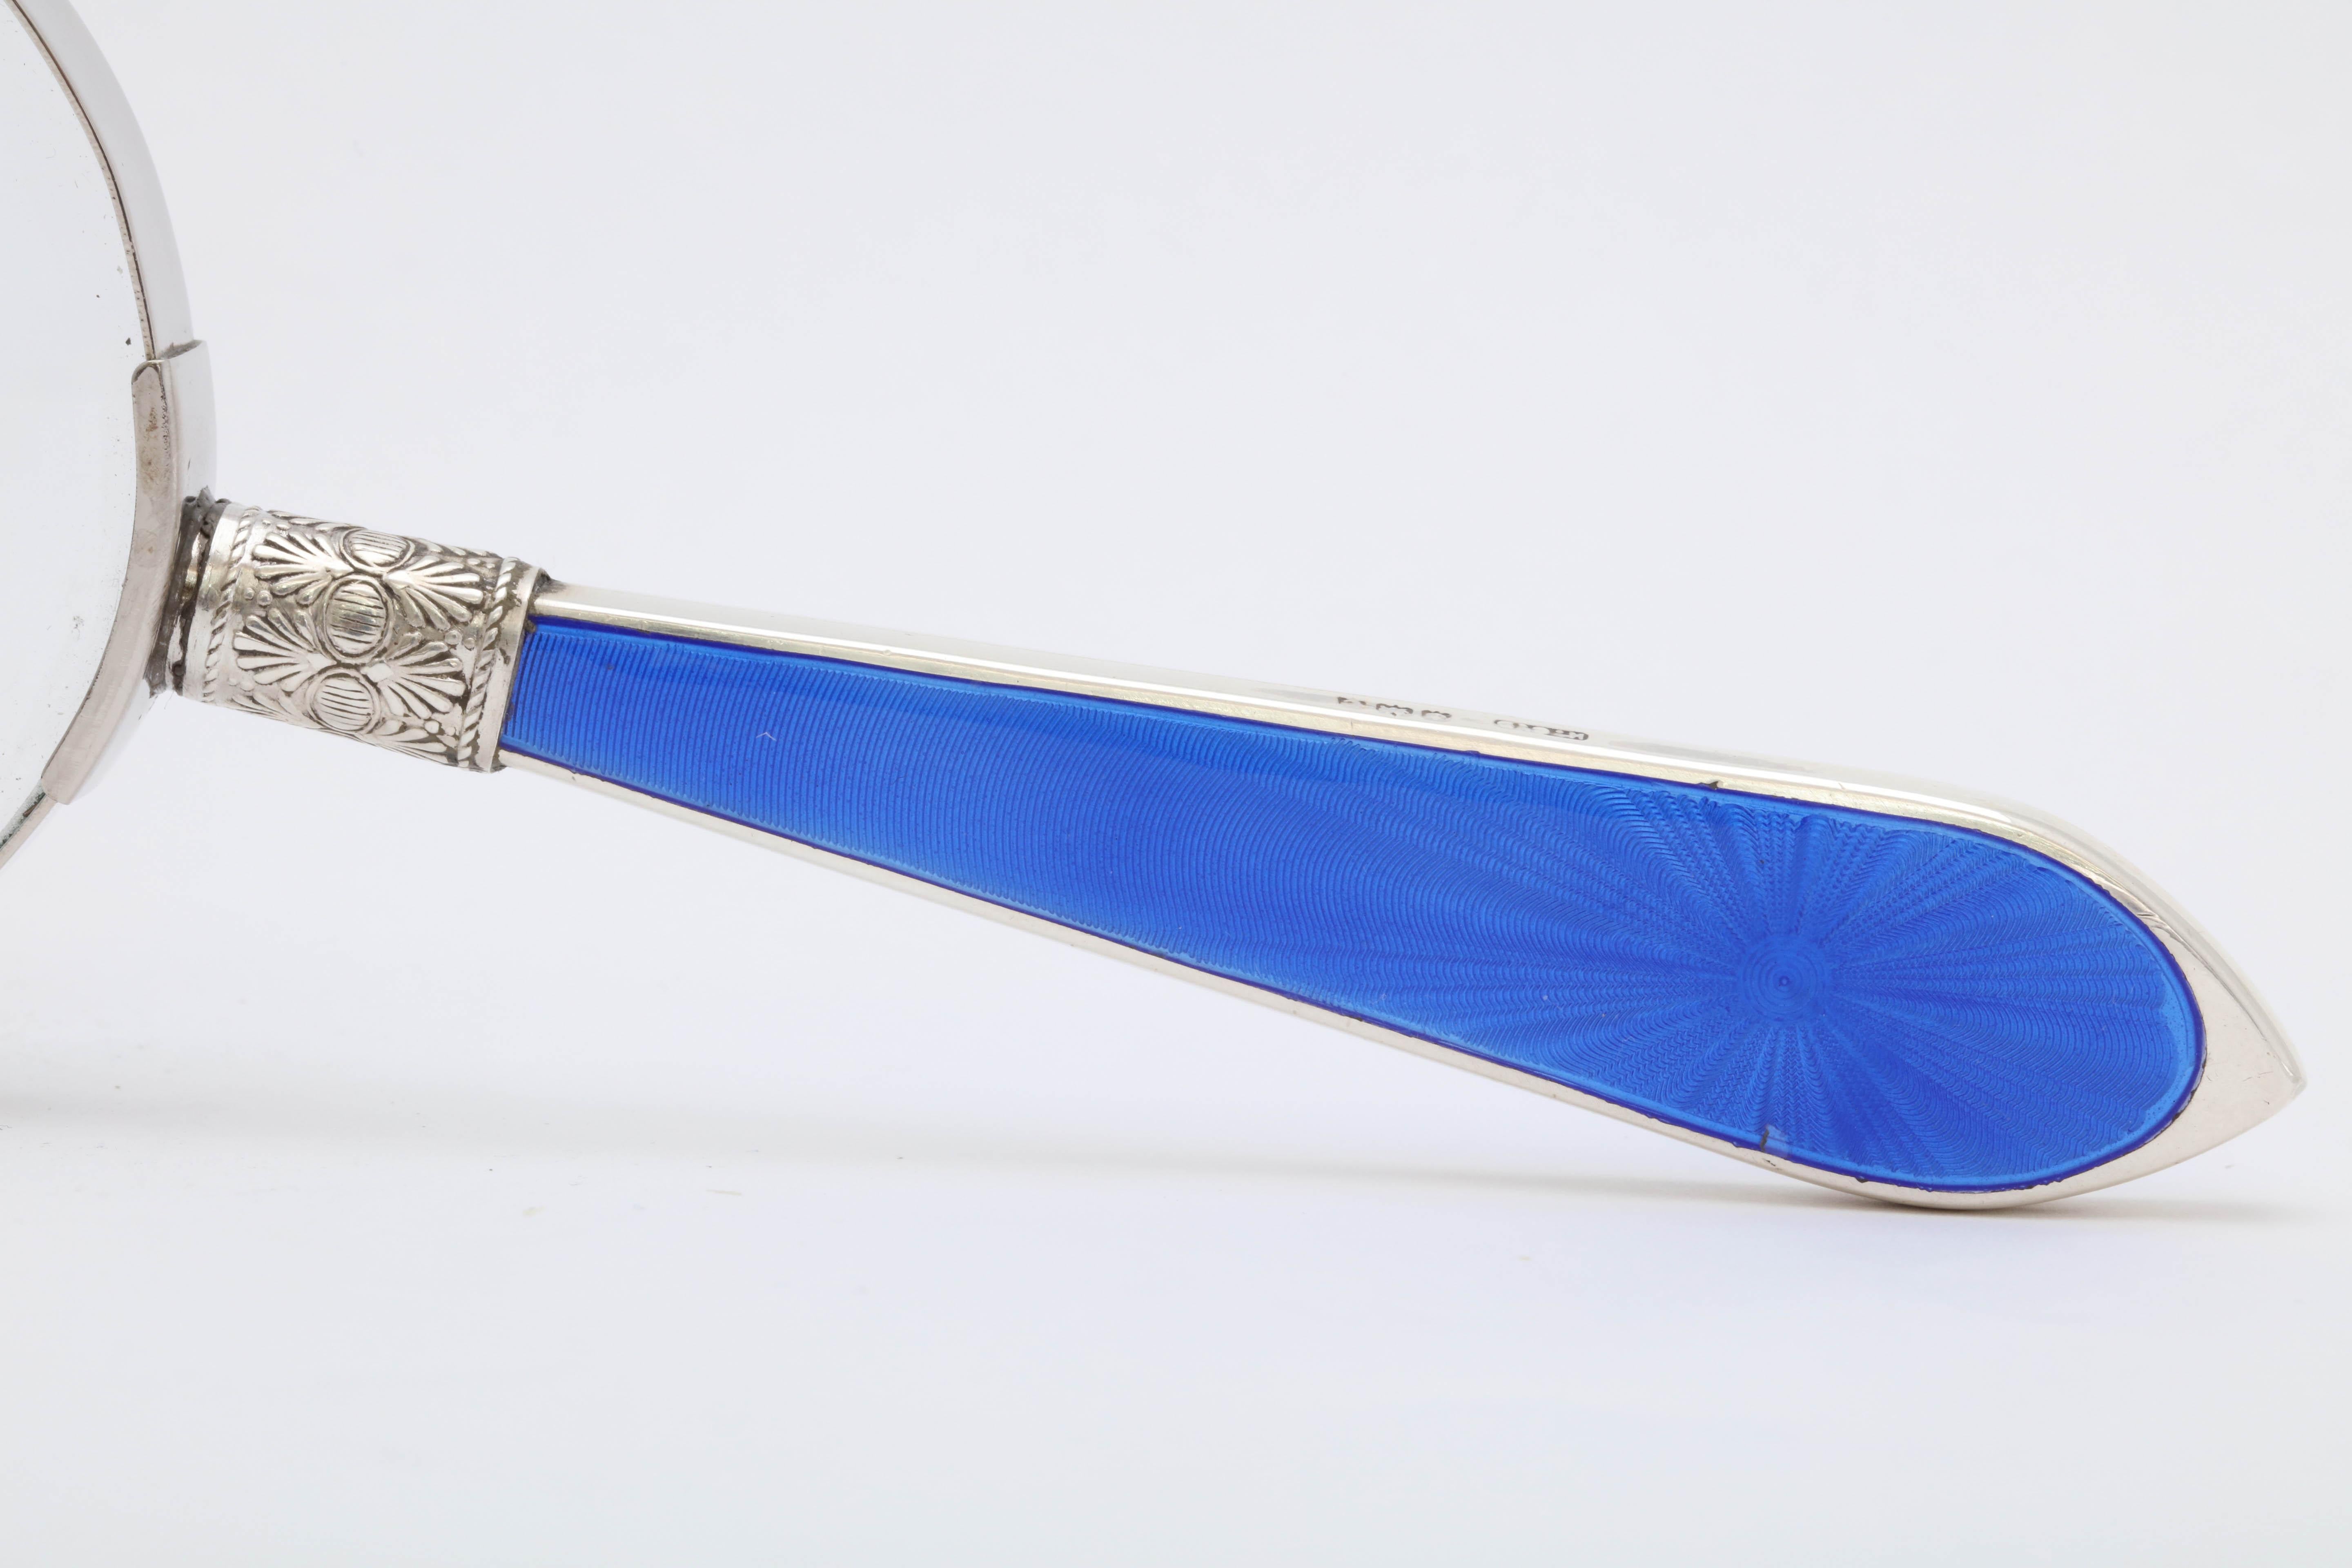 Art Deco, sterling silver and deep blue guilloche enamel-mounted magnifying glass, Birmingham, England, 1927, Henry C. Davis - maker. Glass itself has metal surround. Sterling silver handle is enameled on both sides, each side having a starburst